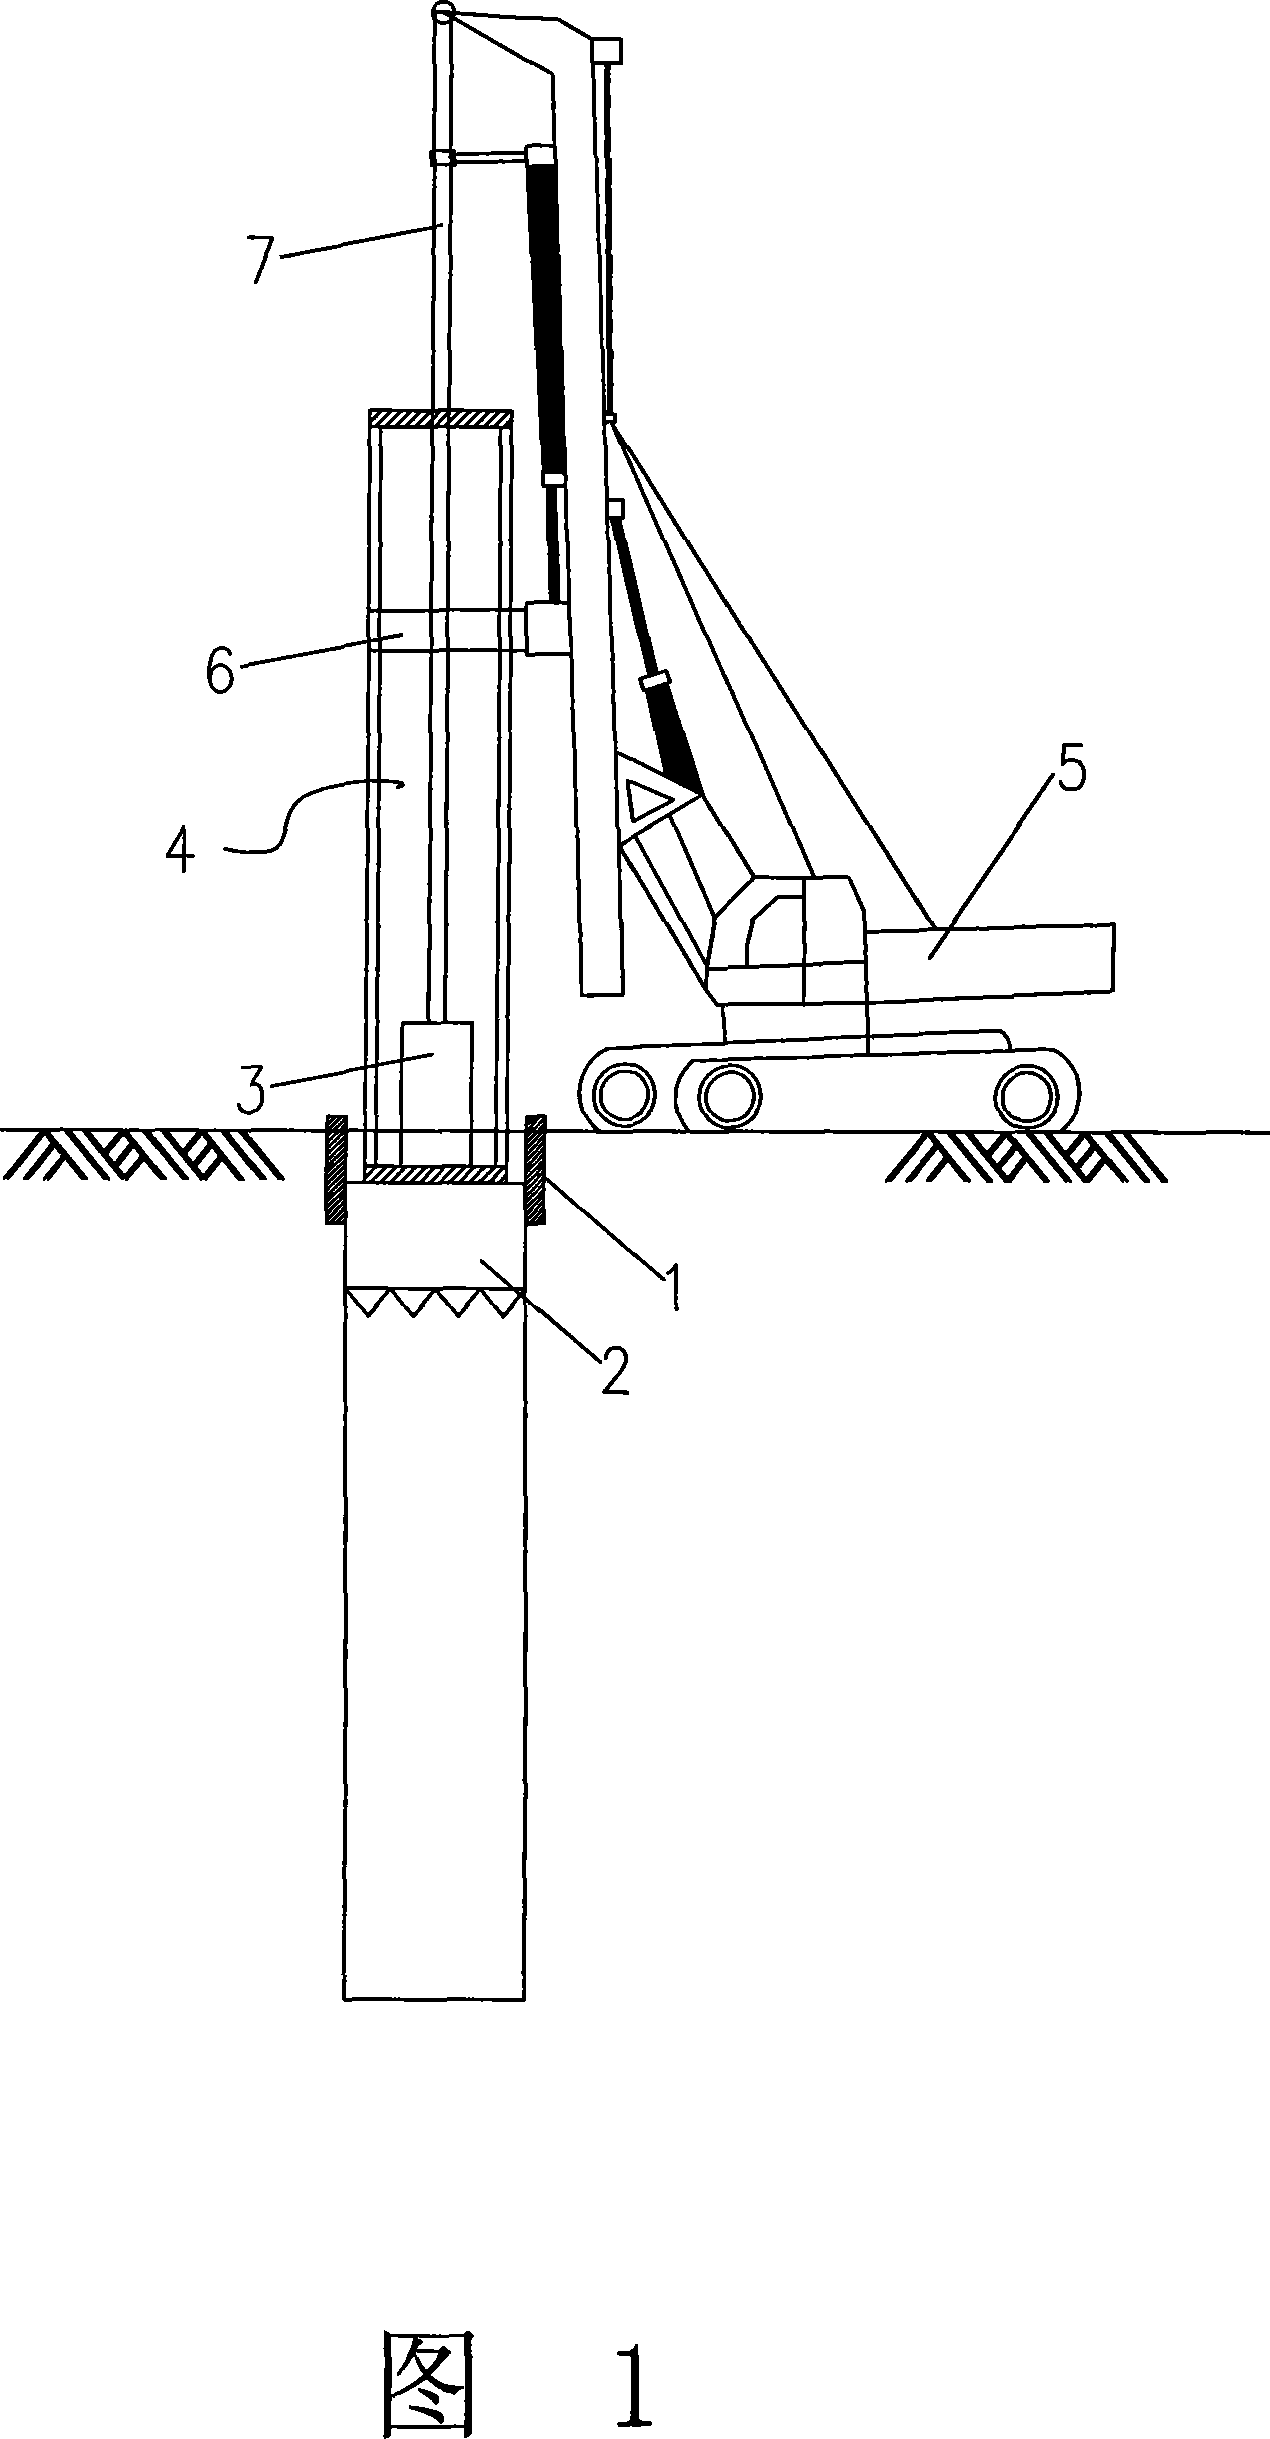 Construction method of drilling follow casting pile used for building or bridge foundation